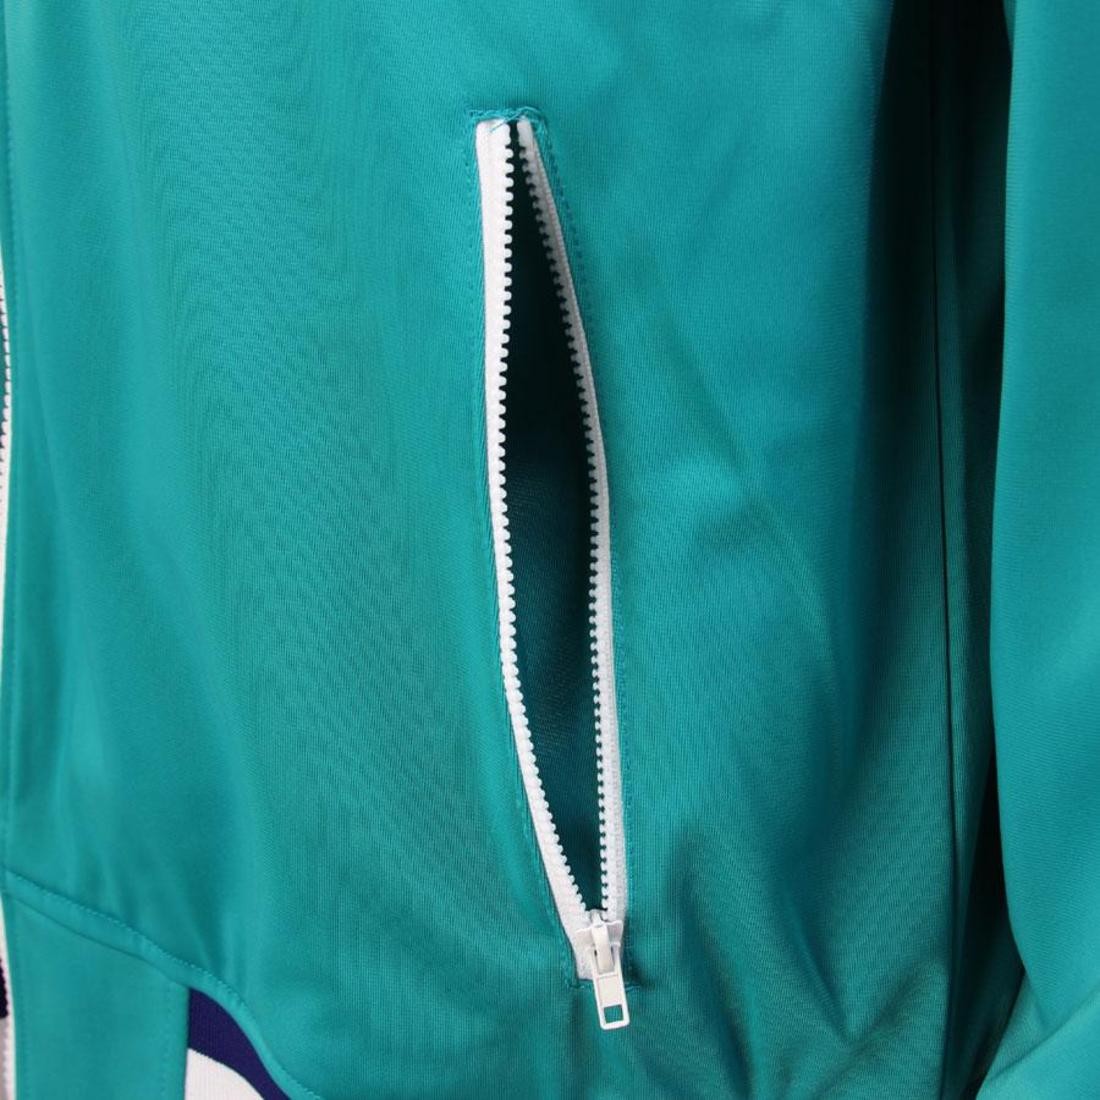 Mitchell And Ness Charlotte Hornets NBA Preseason Warm Up Track Jacket  (teal)